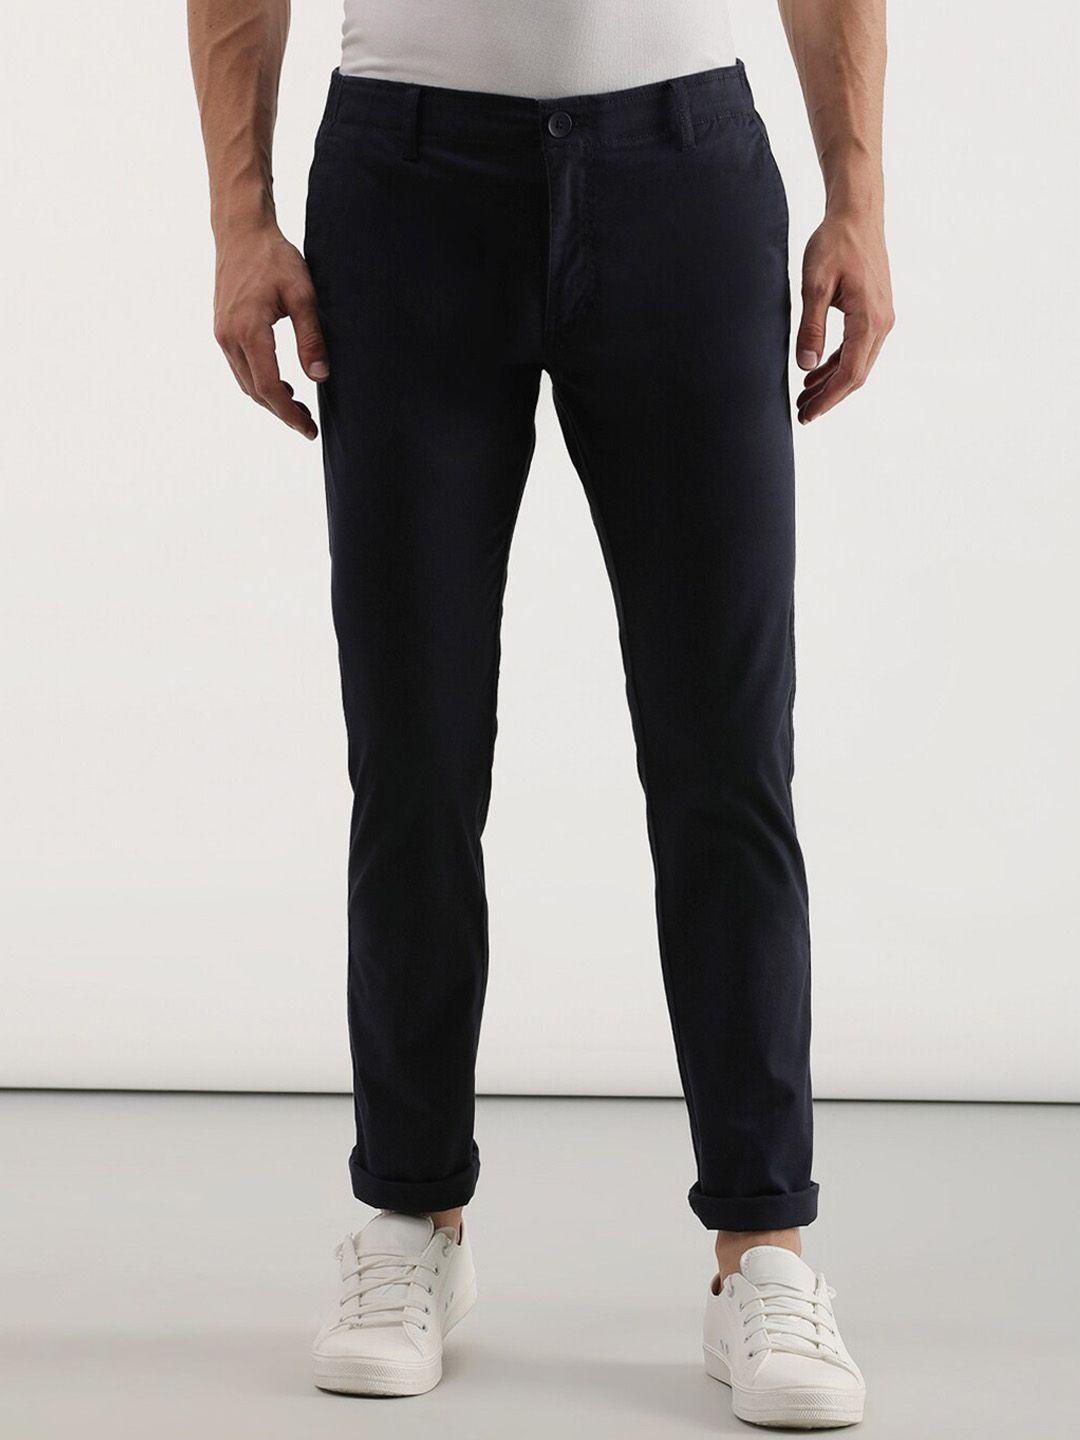 lee-men-slim-fit-low-rise-cotton-chinos-trousers